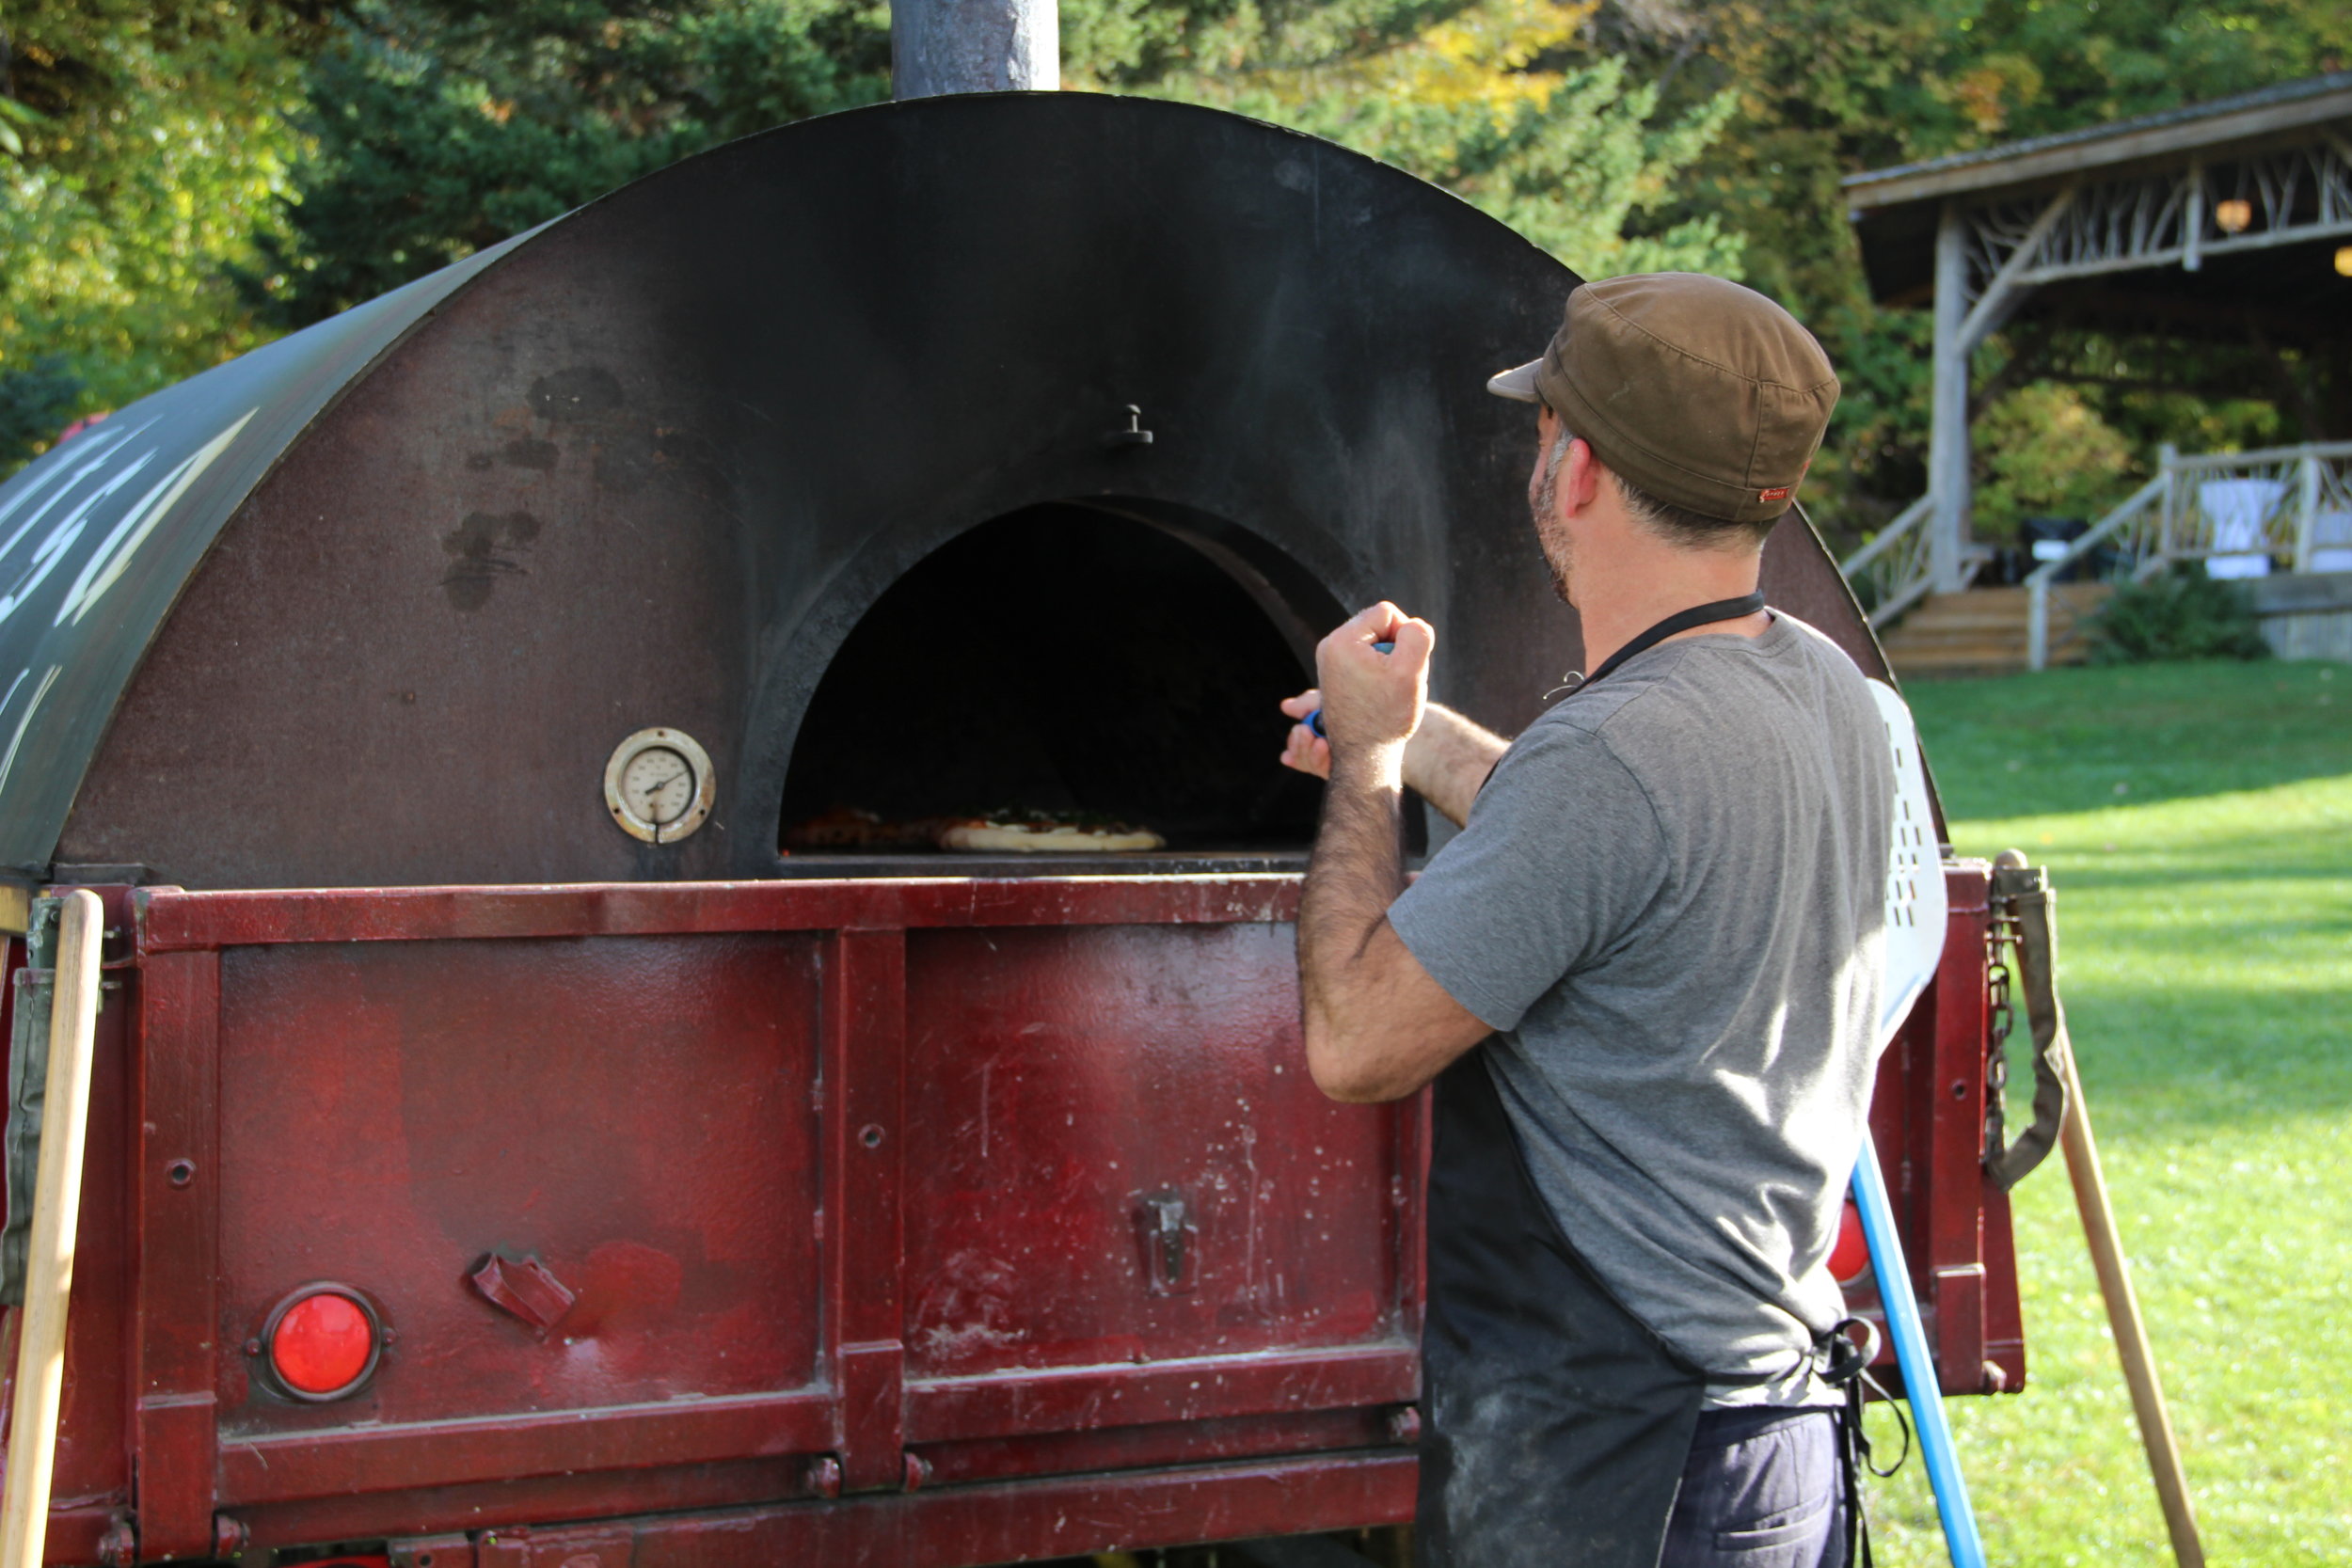 new used custom wood fired pizza trailer for sale upstate ulster county new york nj.JPG